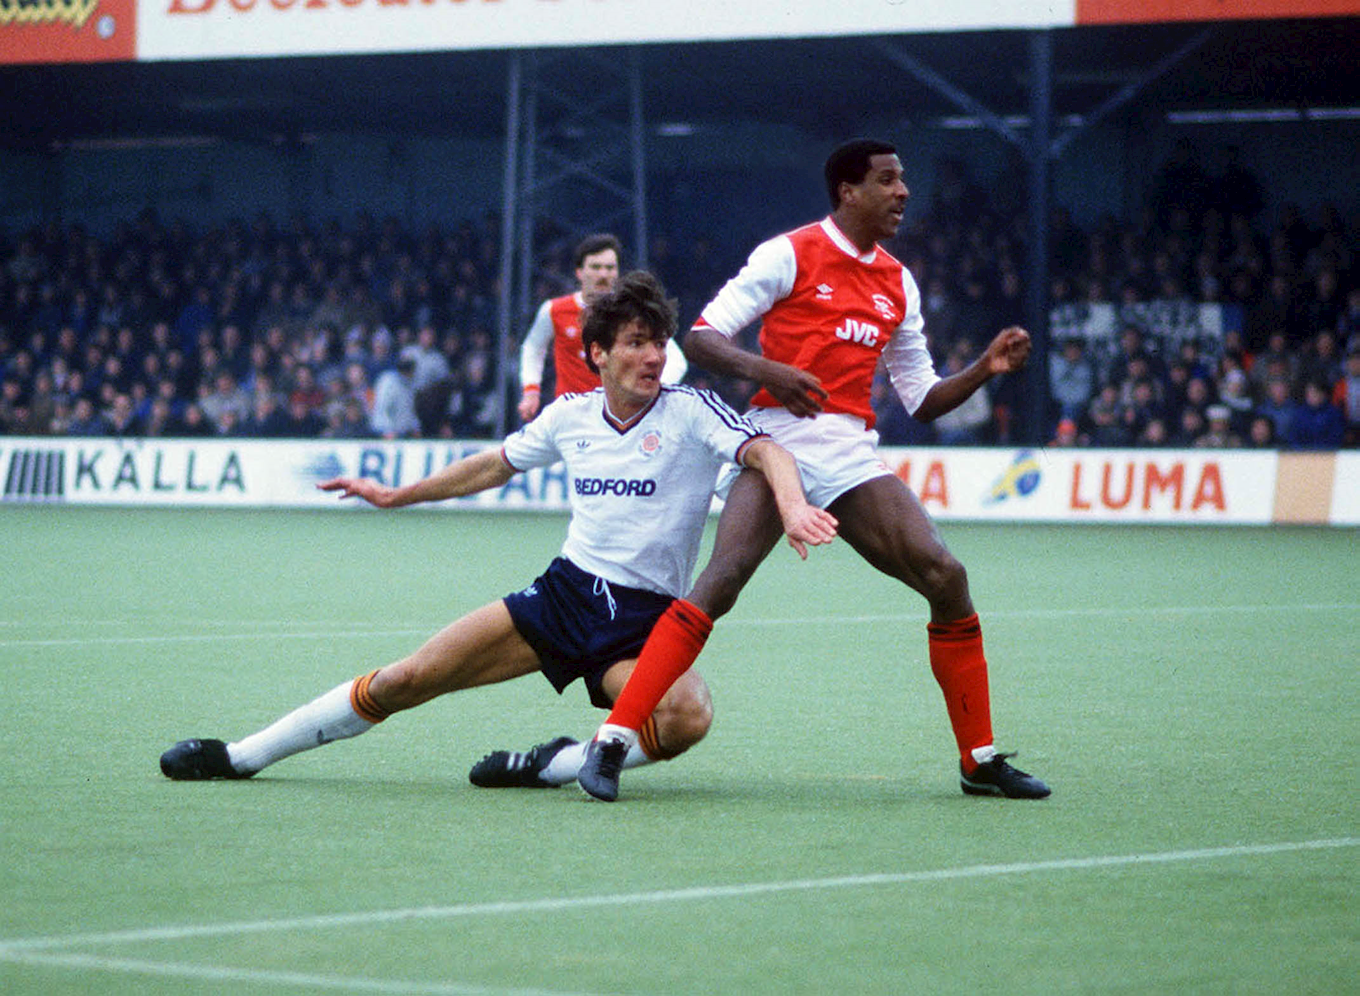 Mick Harford playing for Luton Town against Arsenal at Kenilworth Road in 1986.